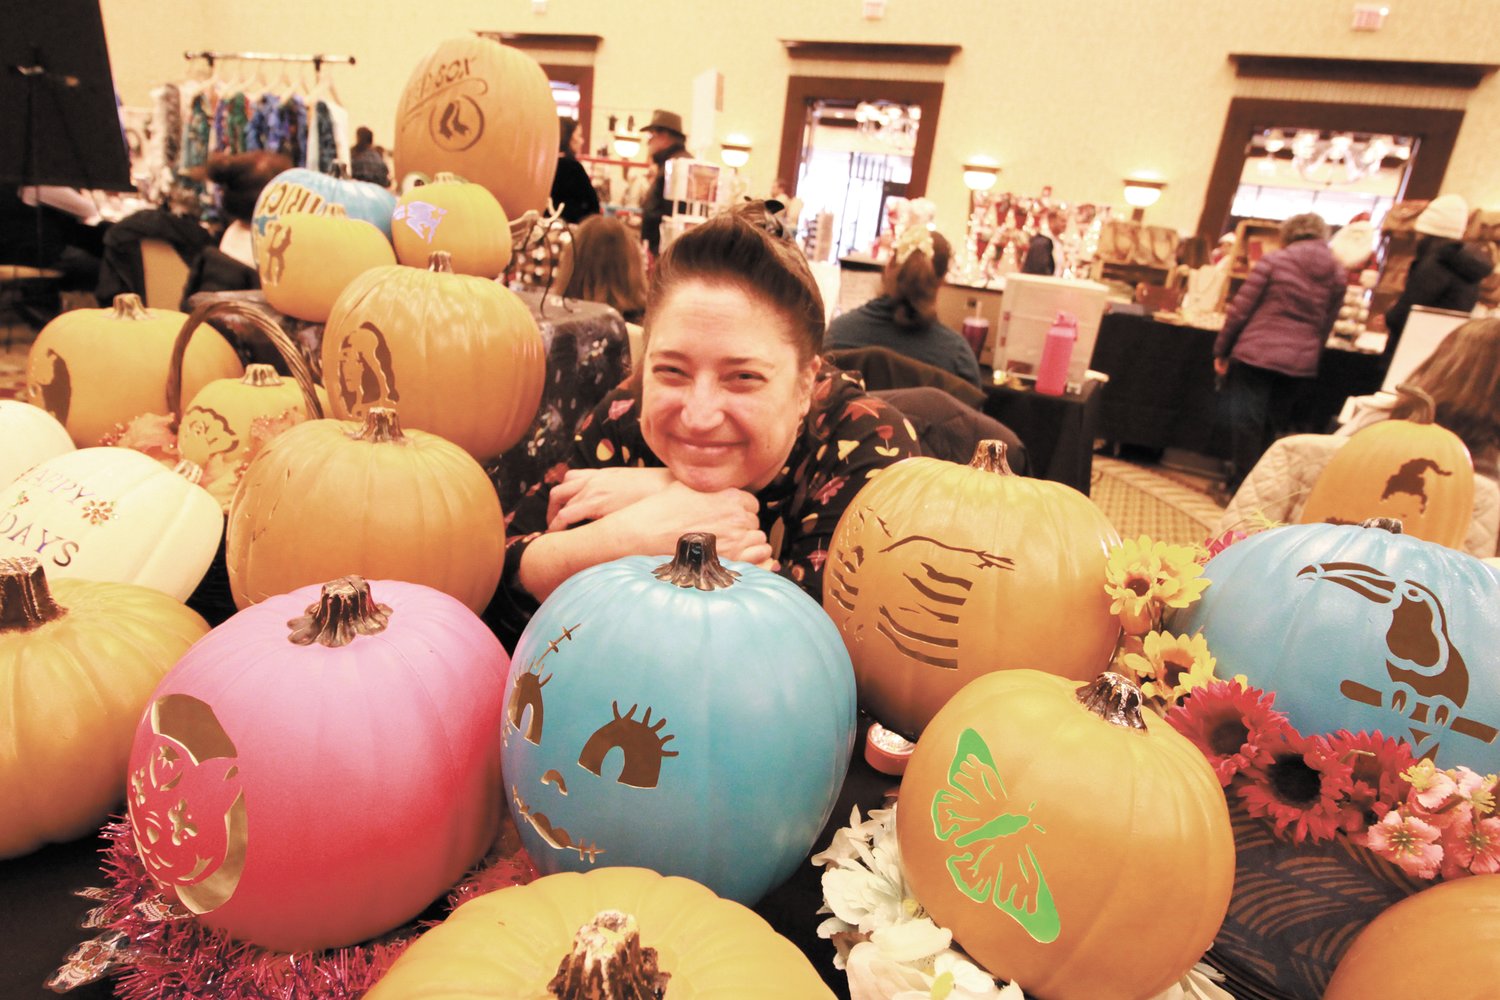 SQUIRREL-PROOF PUMPKINS: What started off as a means of foiling squirrels that nibbled her carved pumpkins has become more than a hobby for Jeanne Cherry of Warwick. She custom-carves artificial pumpkins. Her business is Steanne’s Stuff, a combination of her husband and her first names.